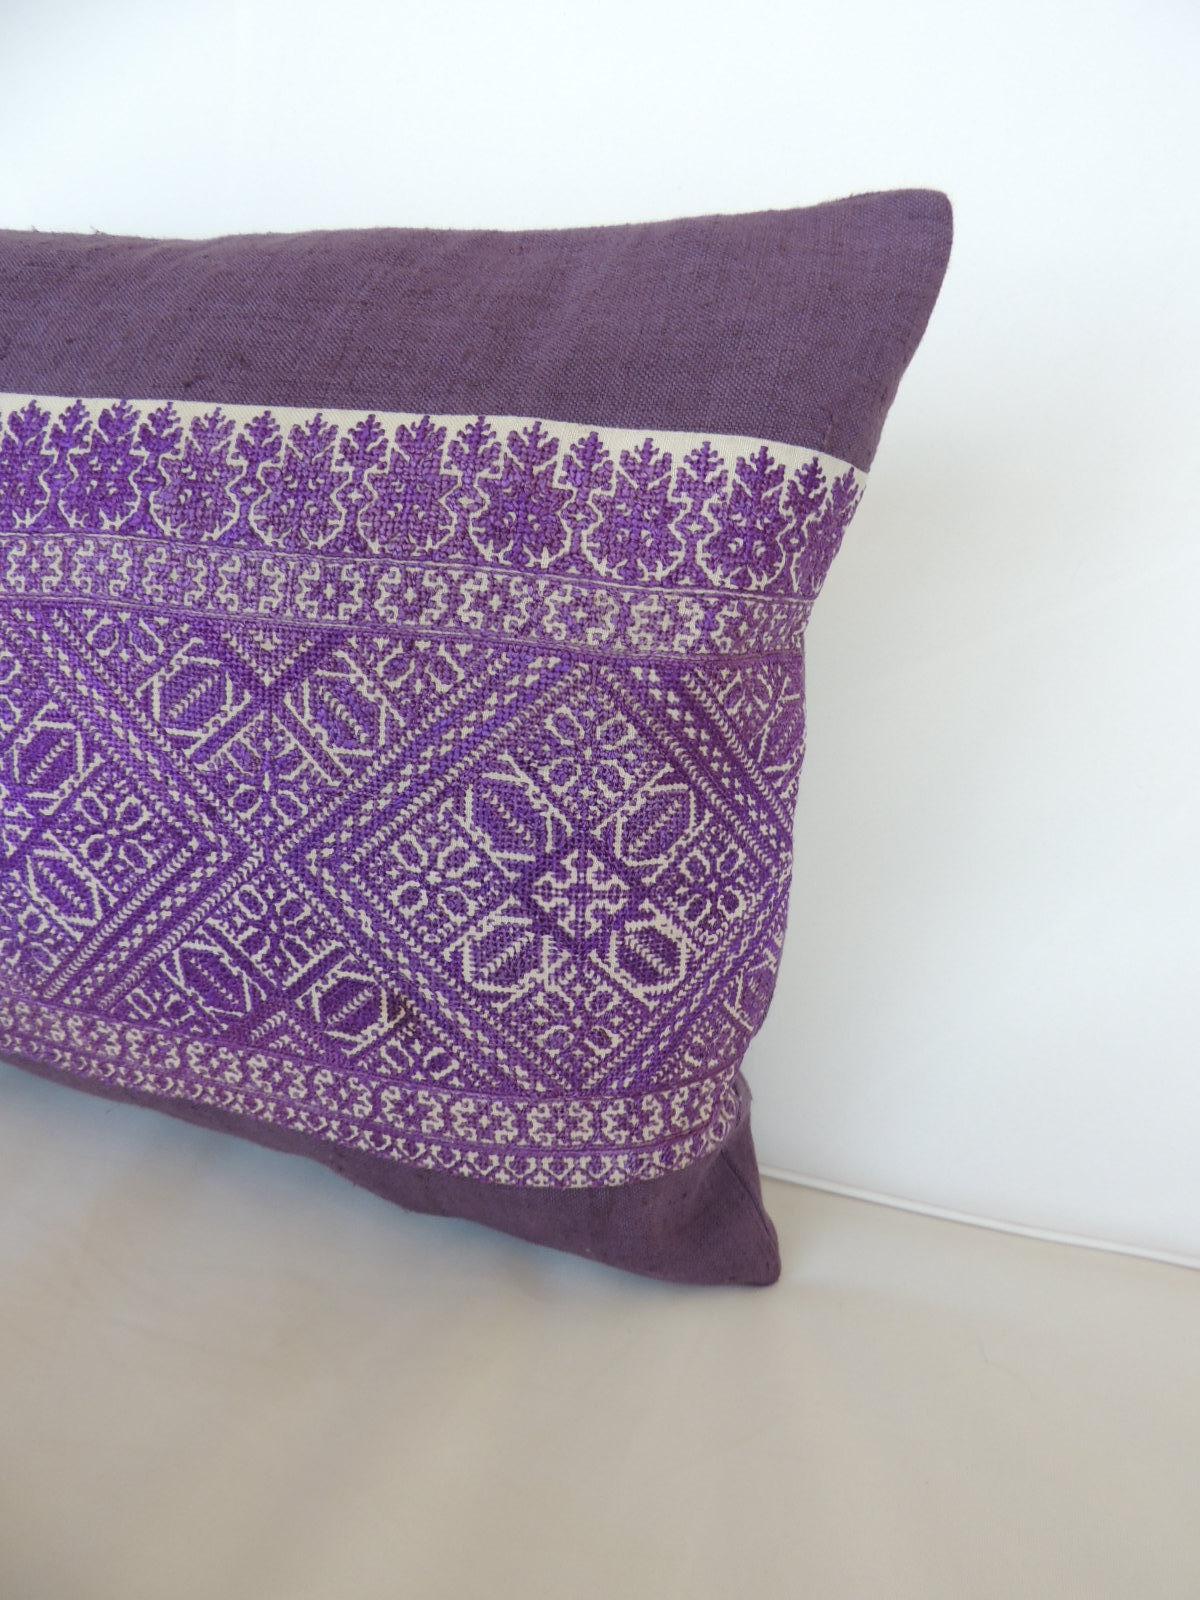 Decorative bolster pillow handcrafted with an artisanal textile from the fiber arts tradition of Morocco.
The purple Fez embroidery was framed in the front with a homespun vintage dusty purple linen.
Same dusty purple linen as